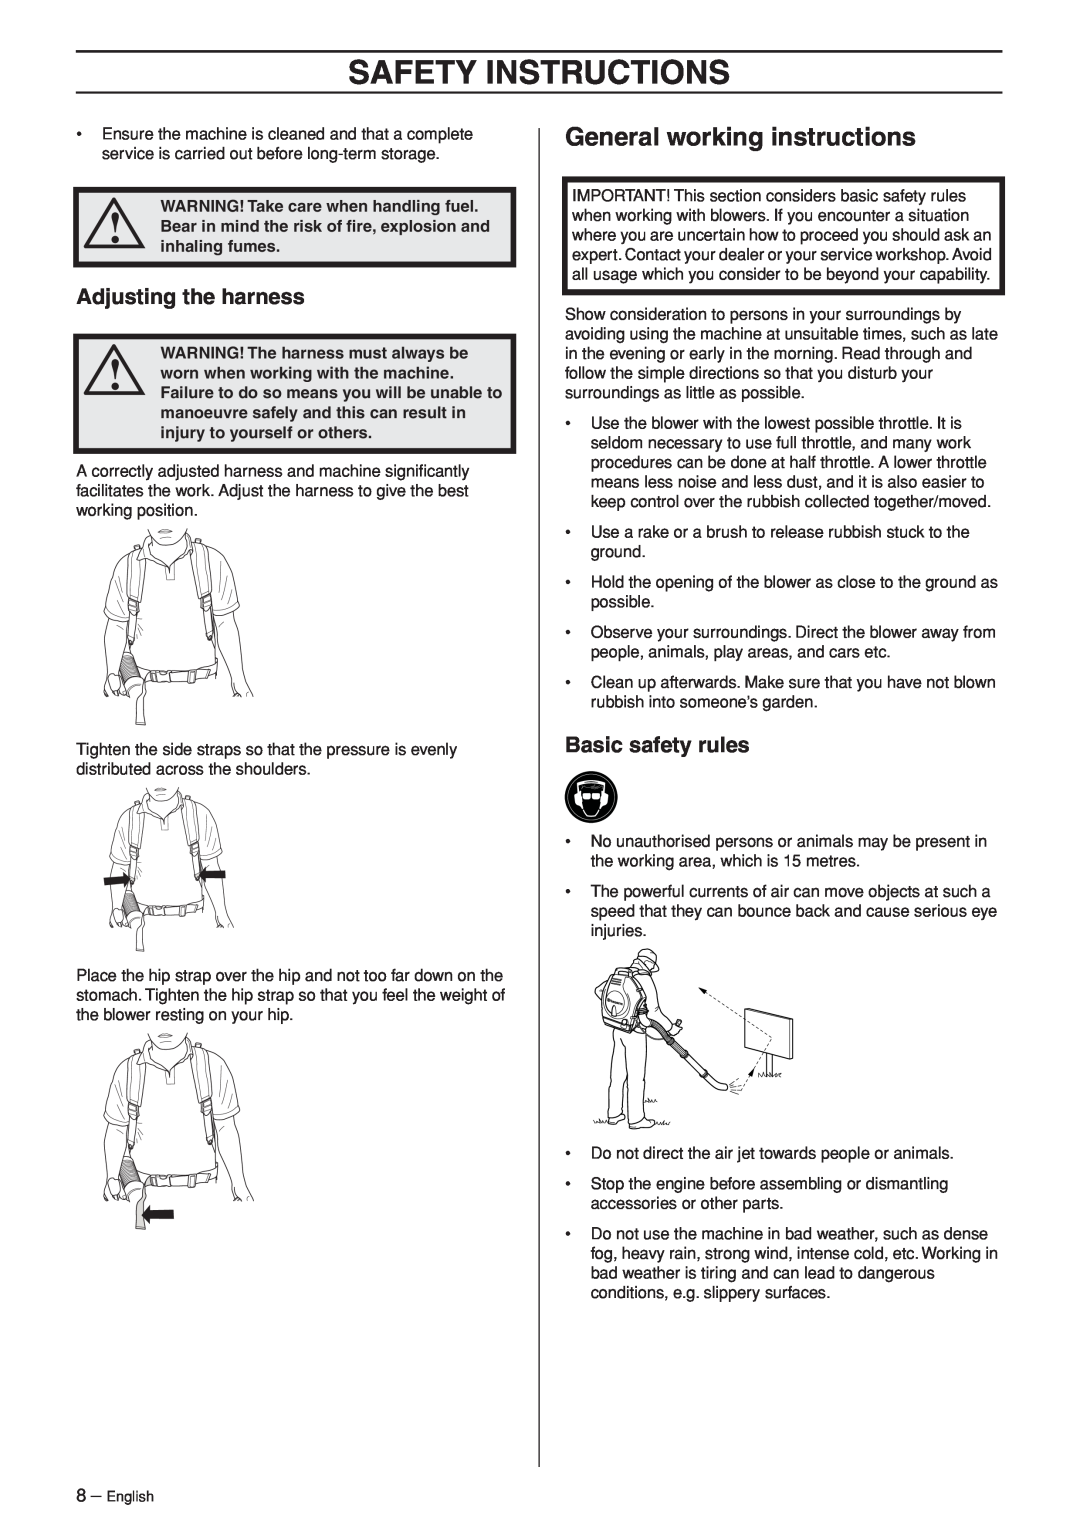 Husqvarna 953210103 manual General working instructions, Safety Instructions, Adjusting the harness, Basic safety rules 